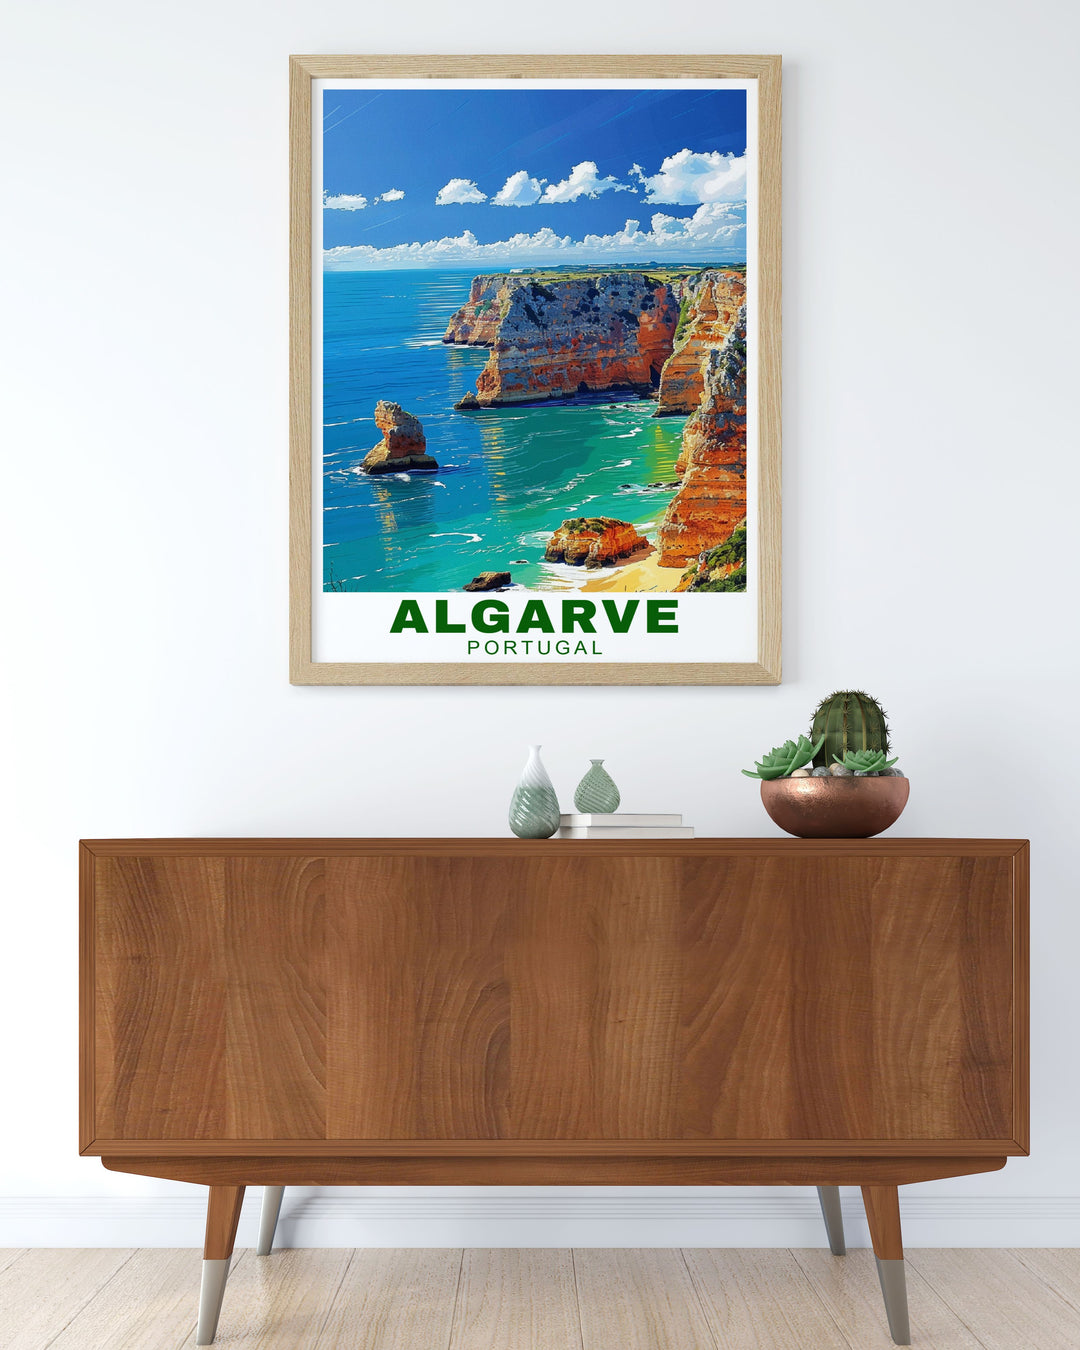 Highlighting the serene Algarve cliffs, this poster showcases Portugals breathtaking coastal beauty, making it a perfect addition for those who appreciate scenic travel art.